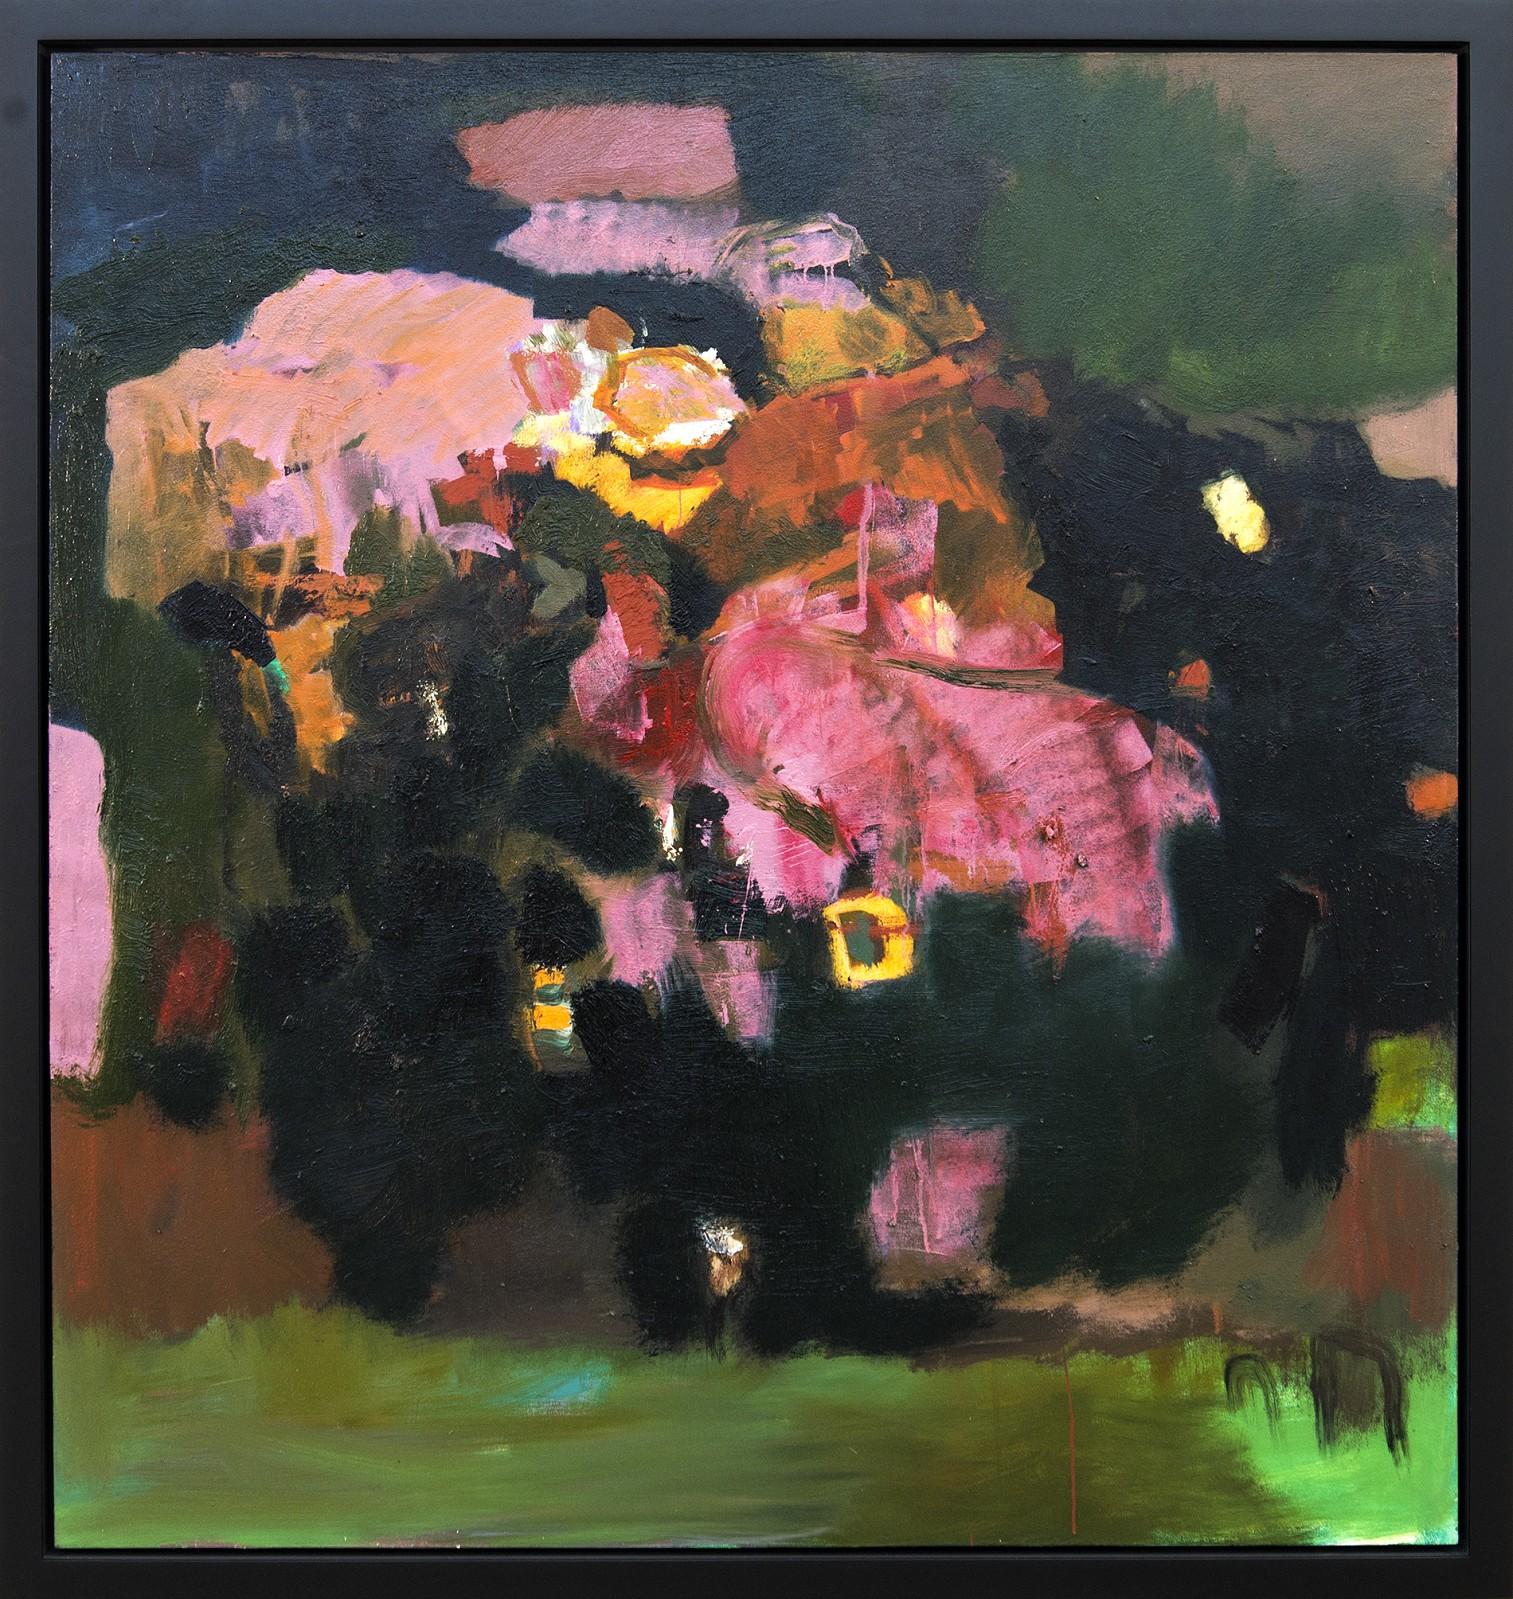 Yellow Buckle with Pinks - large, floral, abstracted still life, oil on canvas